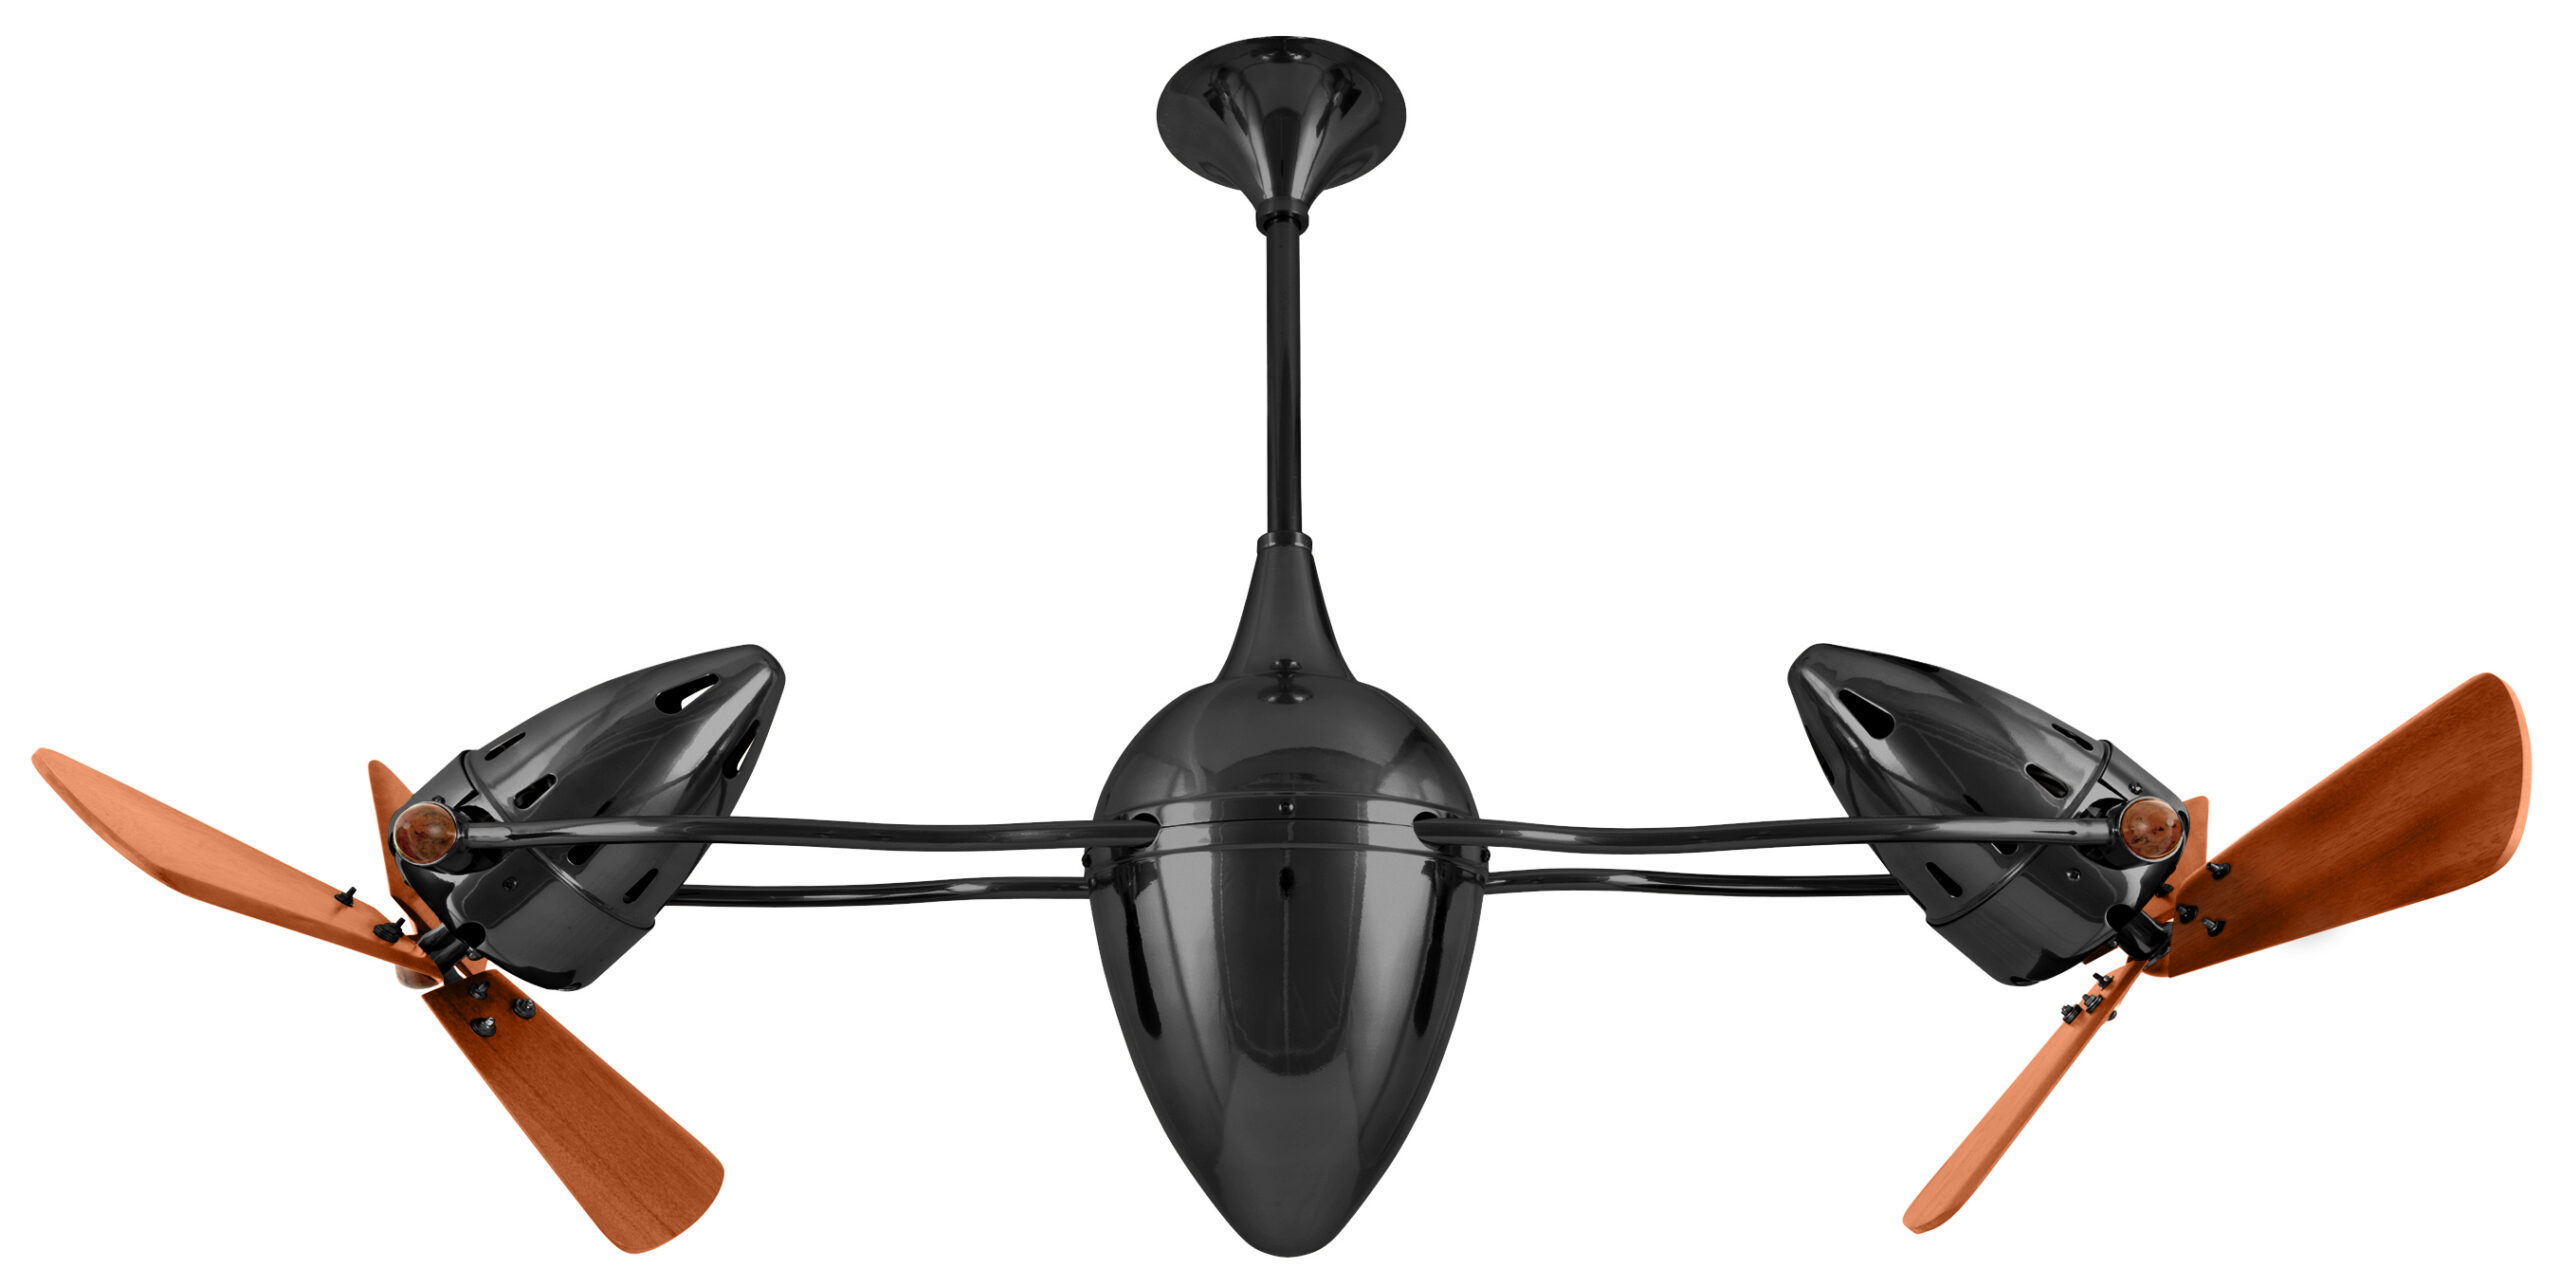 Ar Ruthiane dual headed rotational ceiling fan in black nickel finish with solid mahogany woodl blades made by Matthews Fan Company.